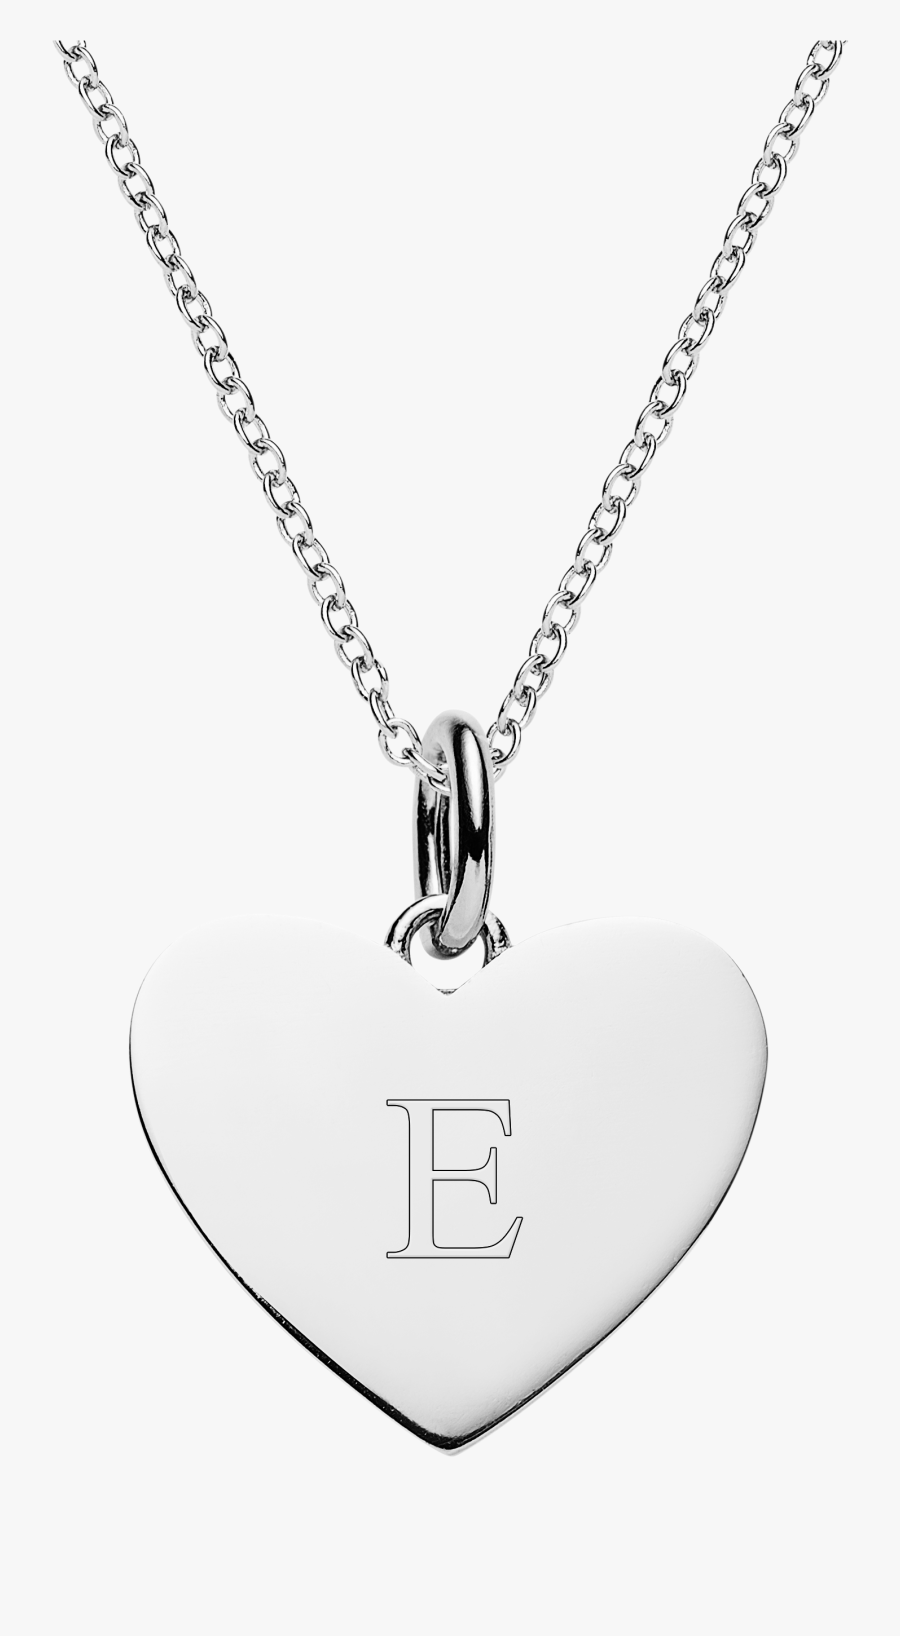 Clip Art Library Download Personalised Silver Heart - Bvlgari Sautoir Necklace 1970's, Transparent Clipart